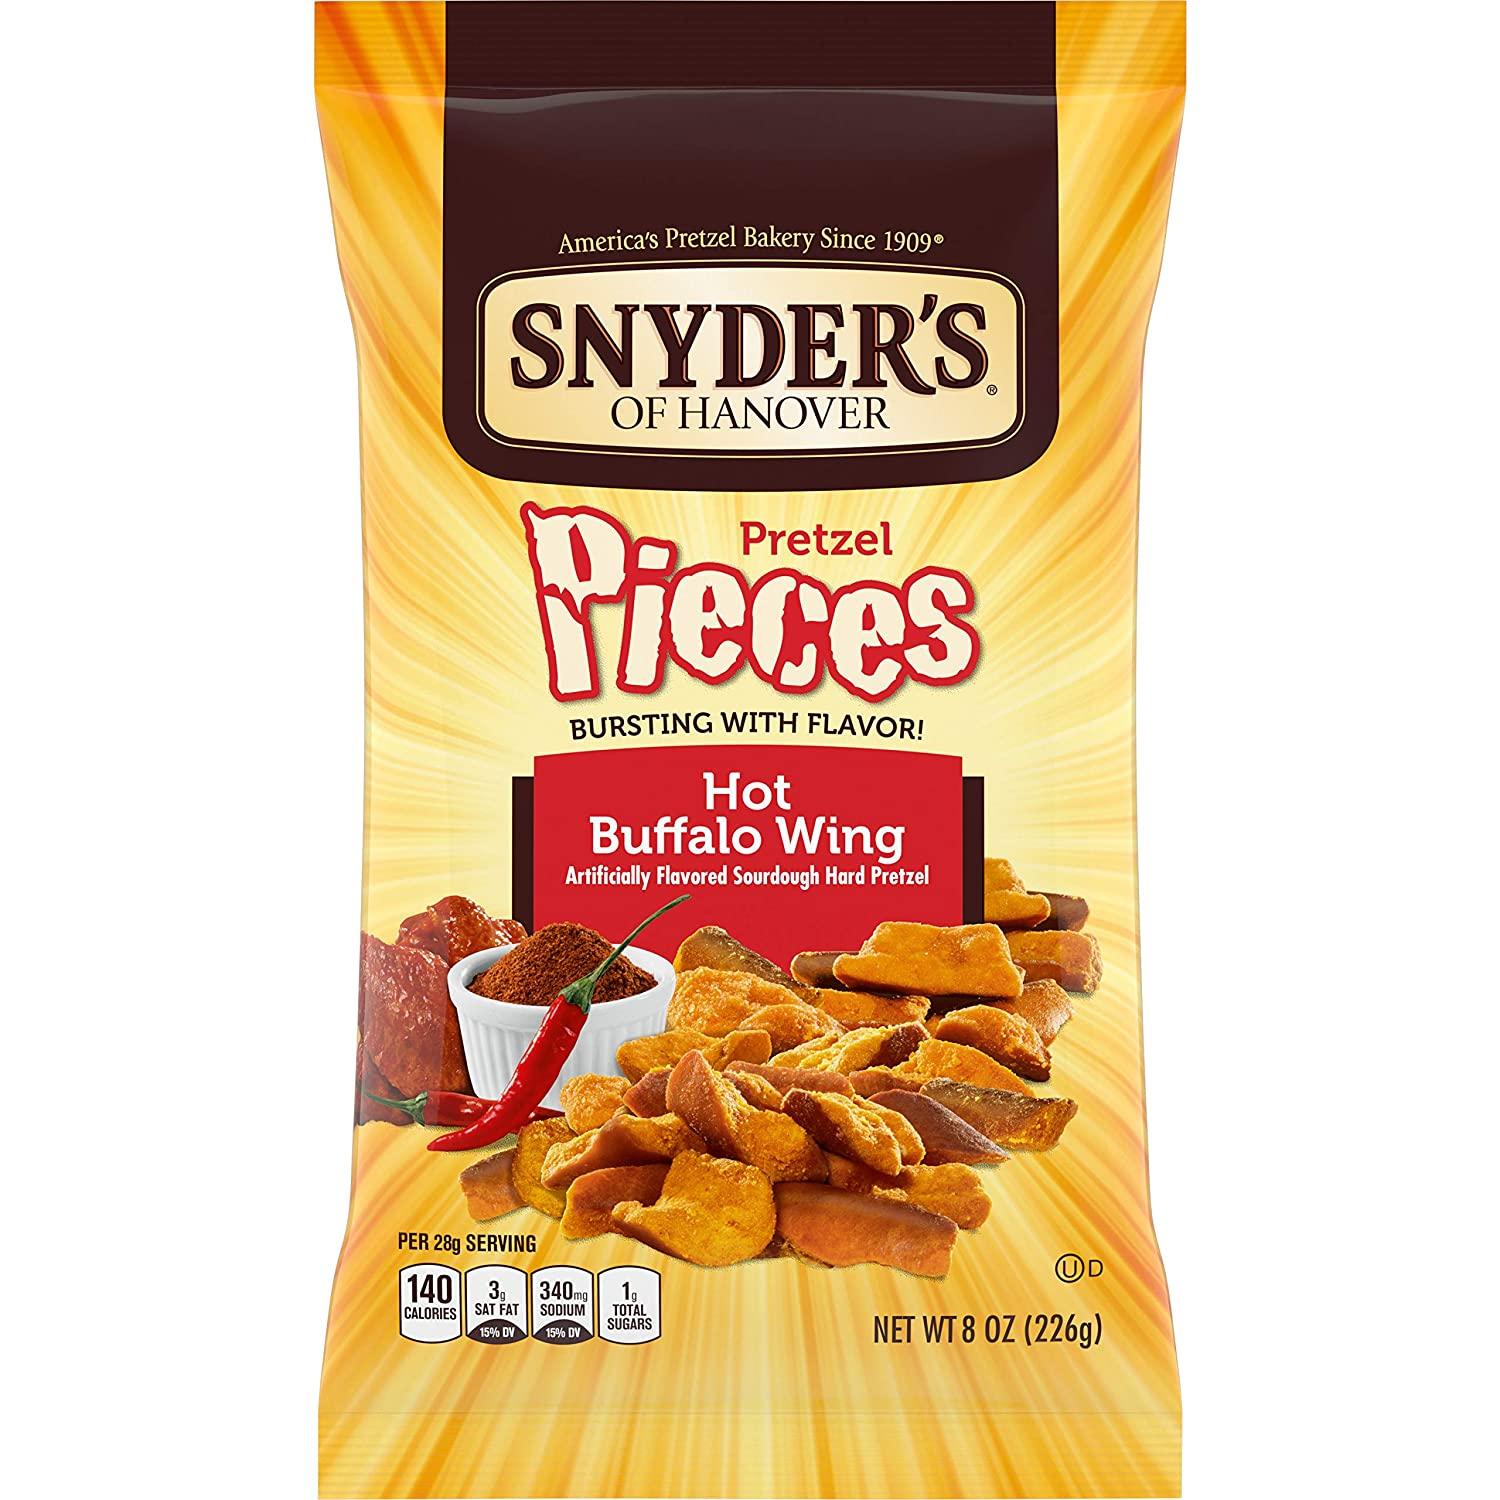 12 Snyders Hanover Pretzel Pieces for $9.02 Shipped